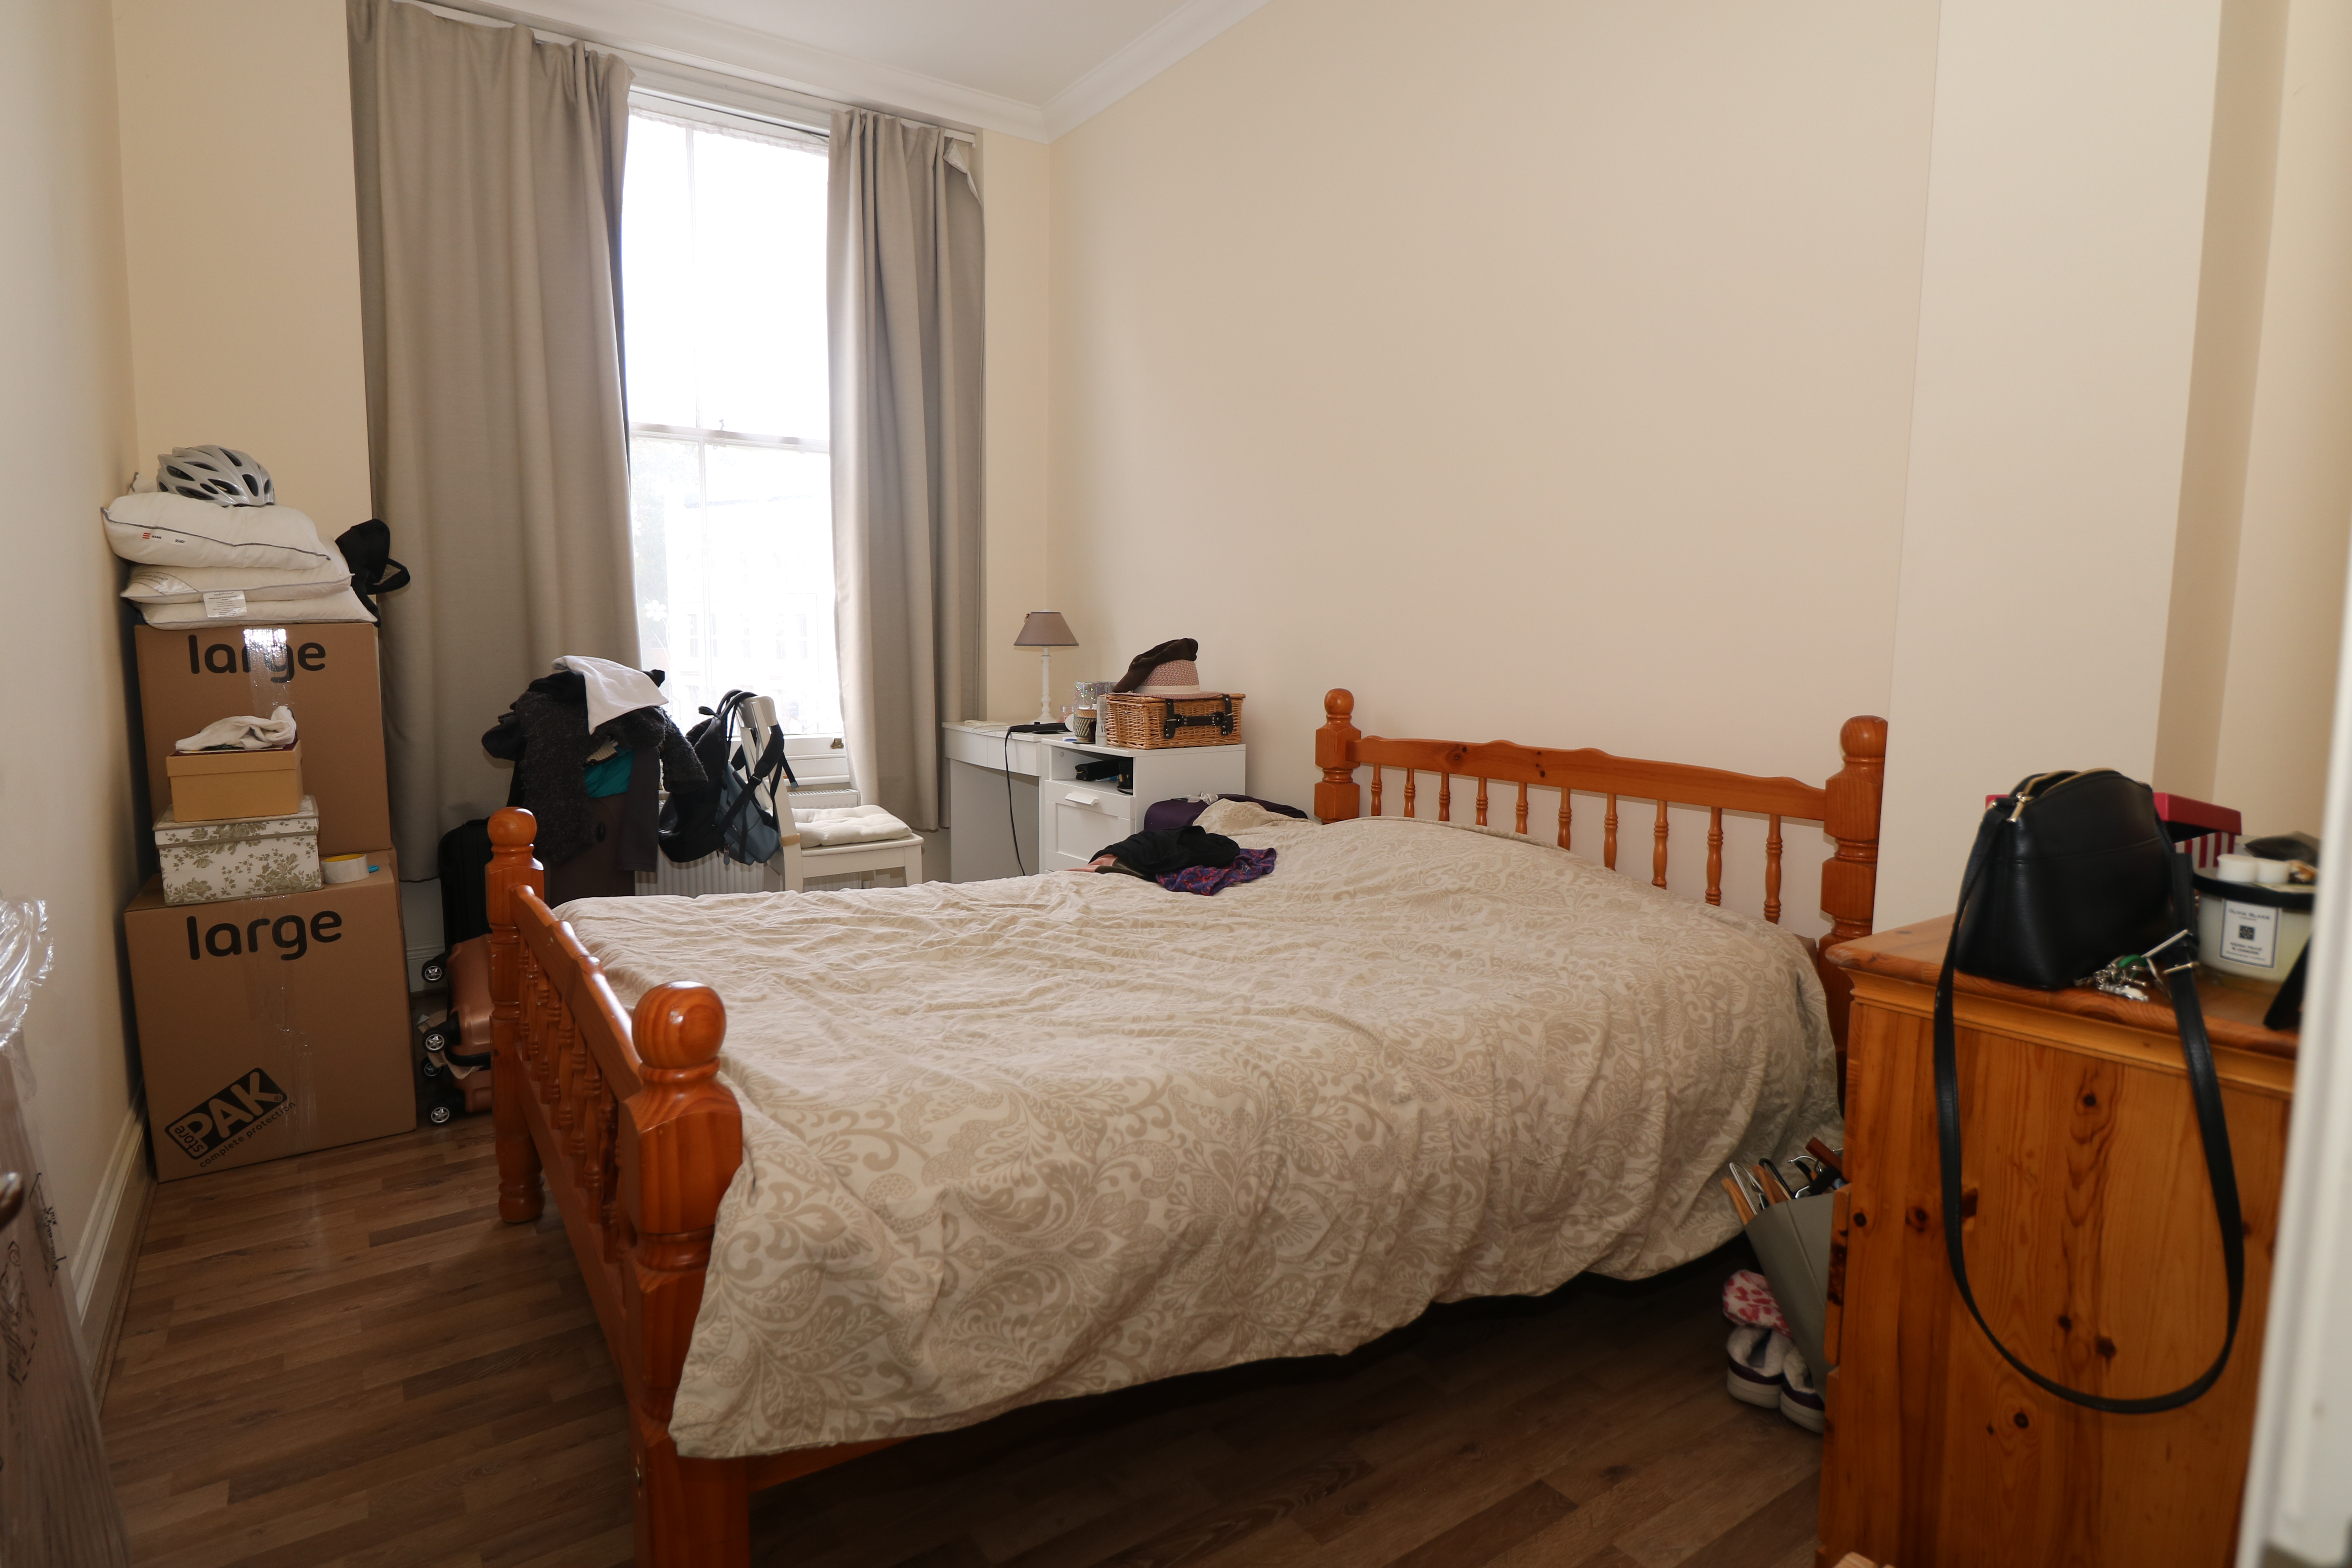 First floor 2 double bedroom flat in Islington, N4. Wood floors, separate lounge and kitchen great condition near zone 2 tube